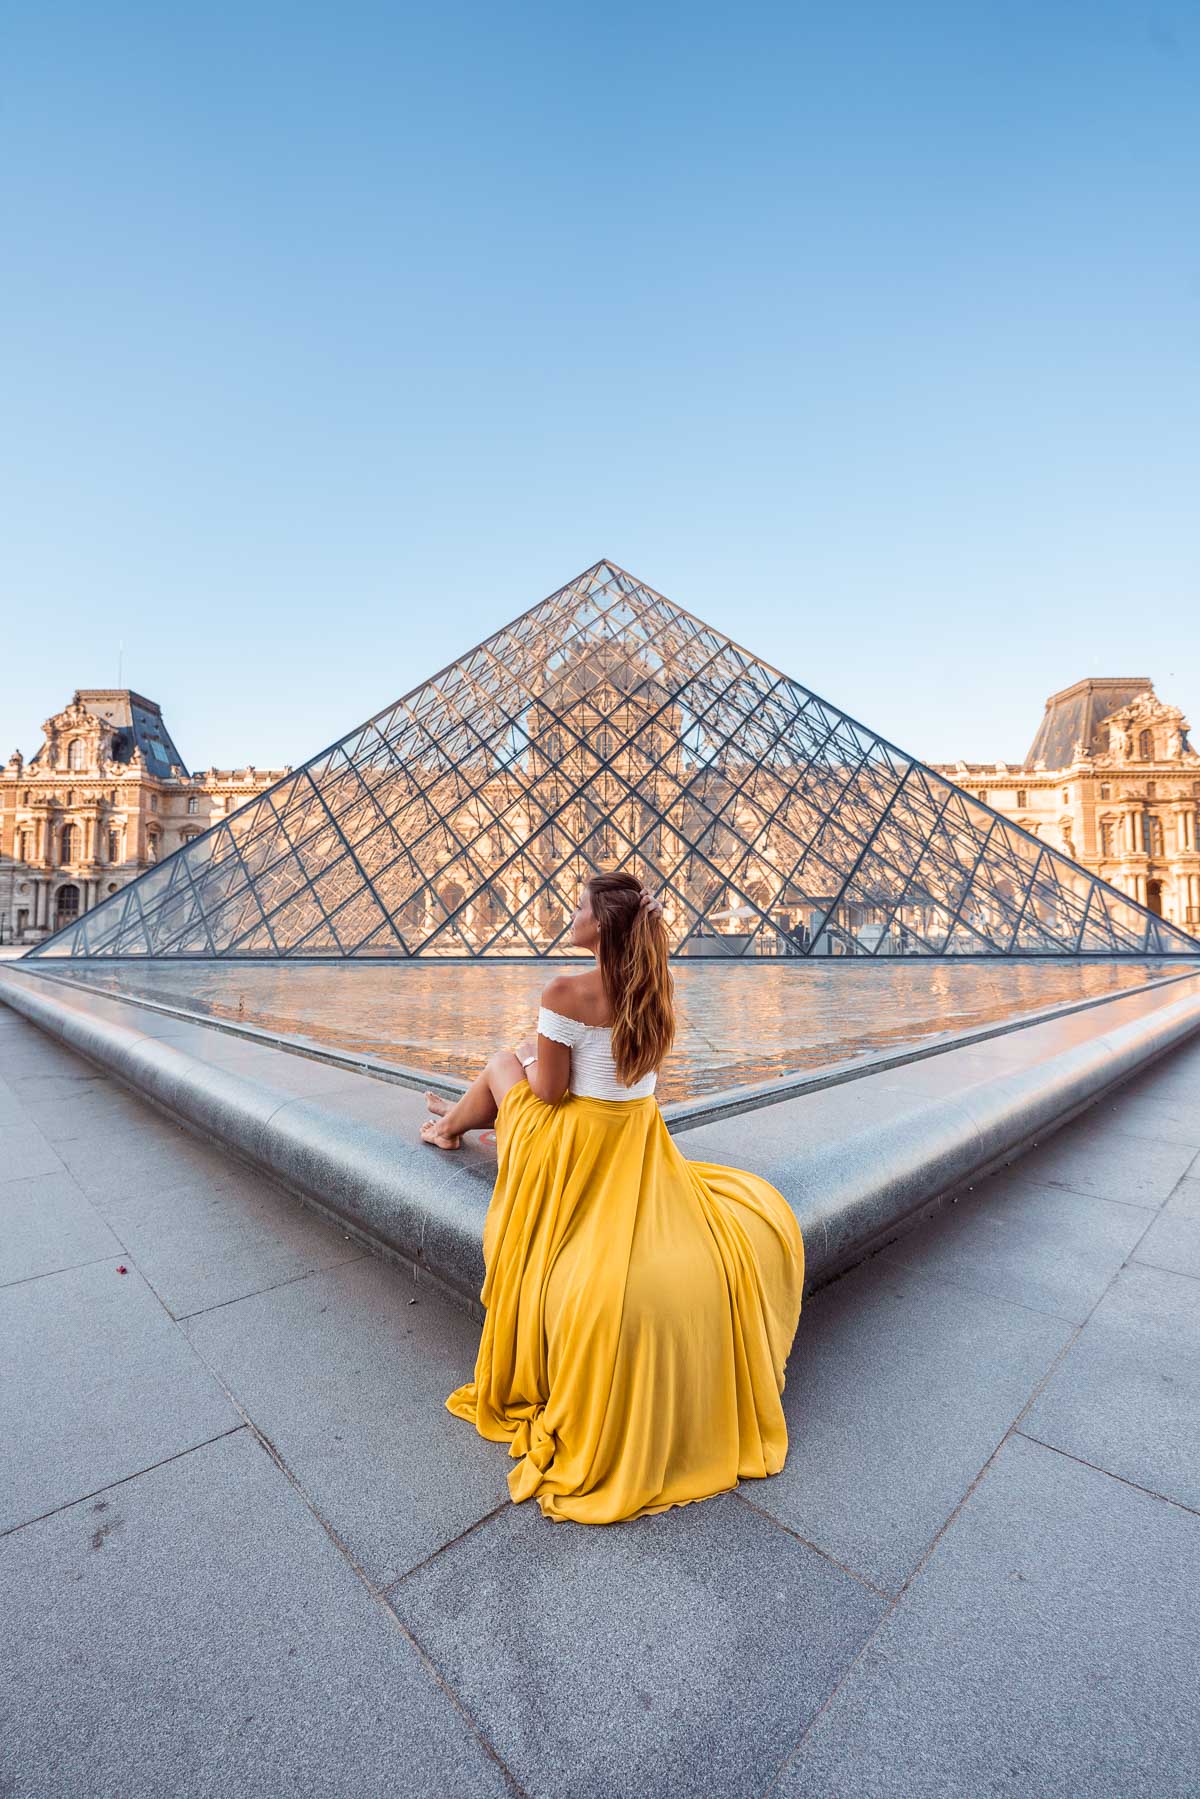 Girl in front of the glass pyramid at the Louvre, Paris